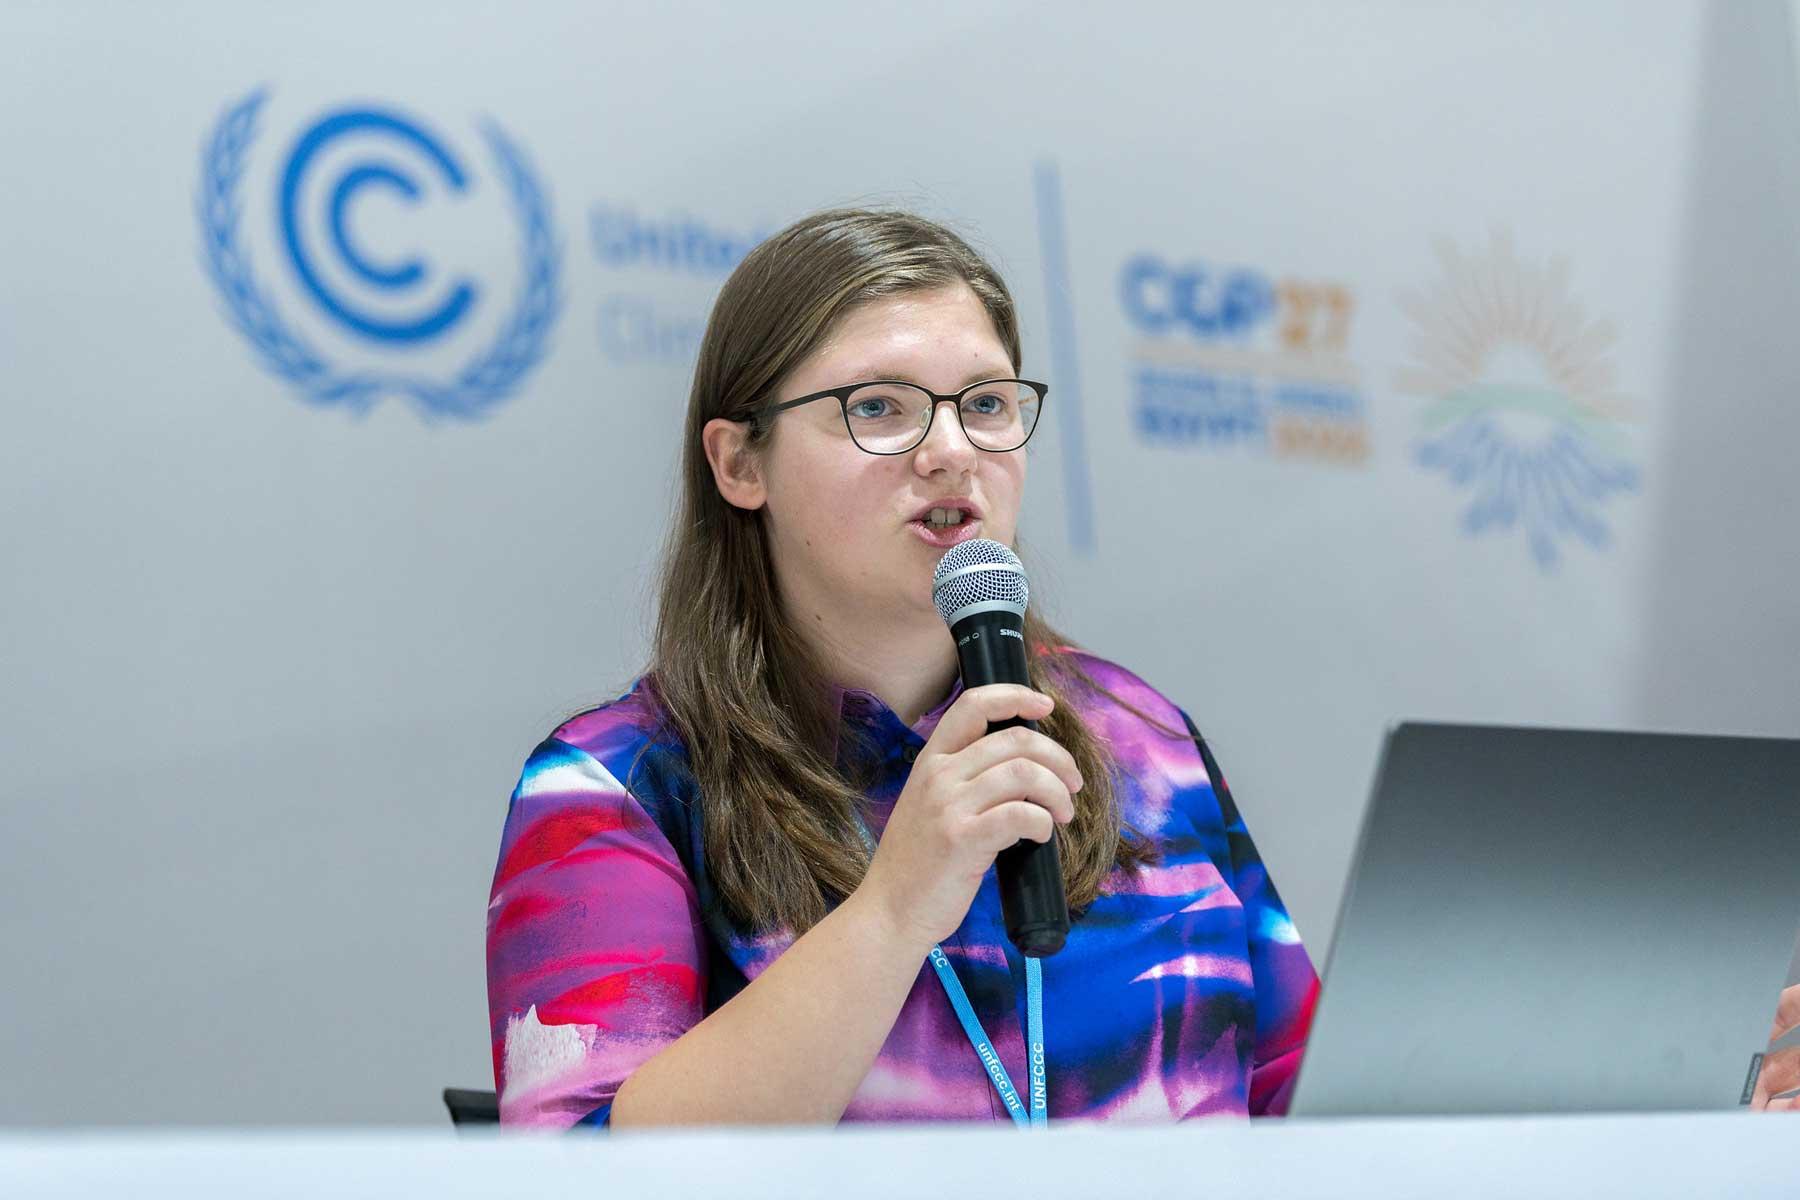 Michelle Schwarz from the Evangelical Lutheran Church in Saxony (Germany) is an LWF delegate to COP27. Here she speaks on an interfaith youth panel during a side event of the UN climate conference. LWF/Albin Hillert